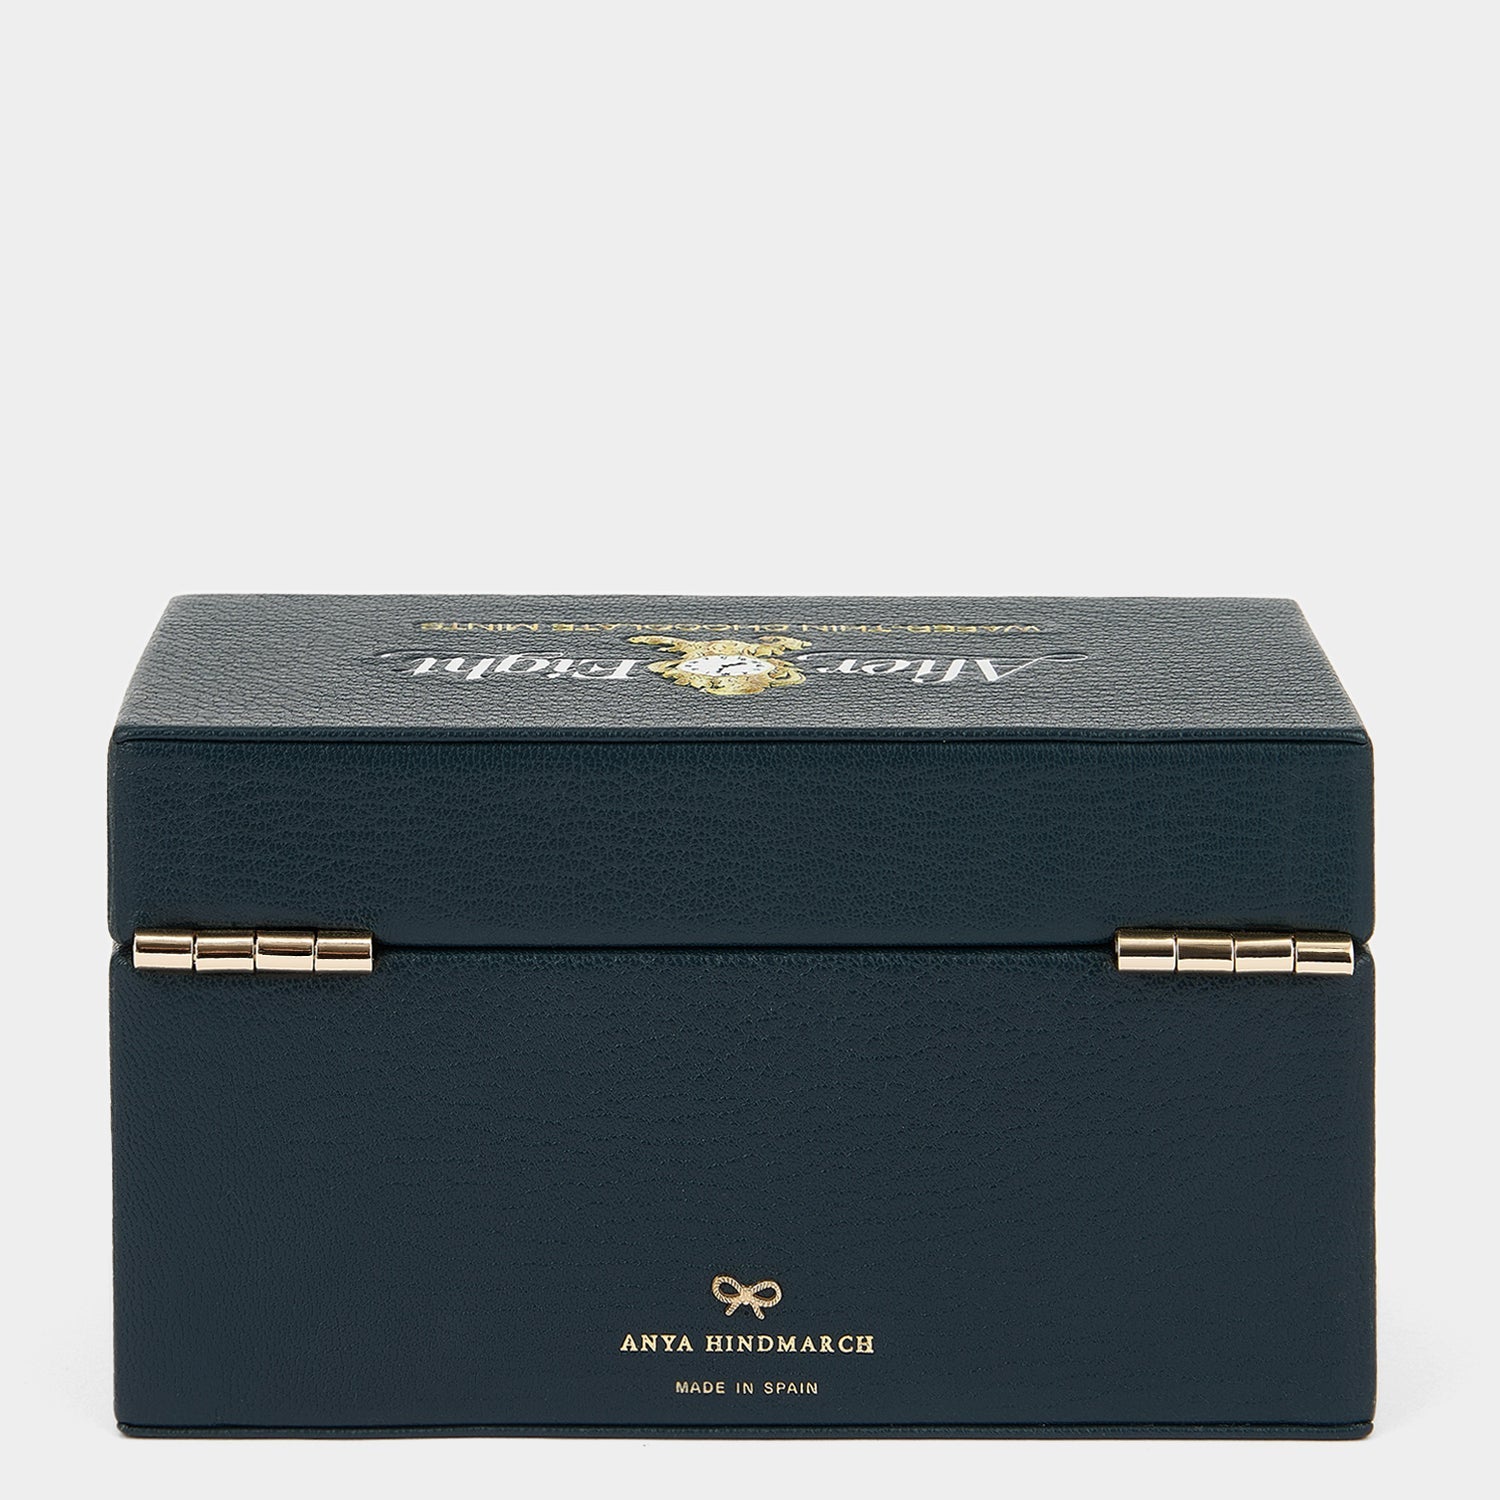 Anya Brands After Eight Box -

                  
                    Capra Leather in Dark Holly -
                  

                  Anya Hindmarch US
